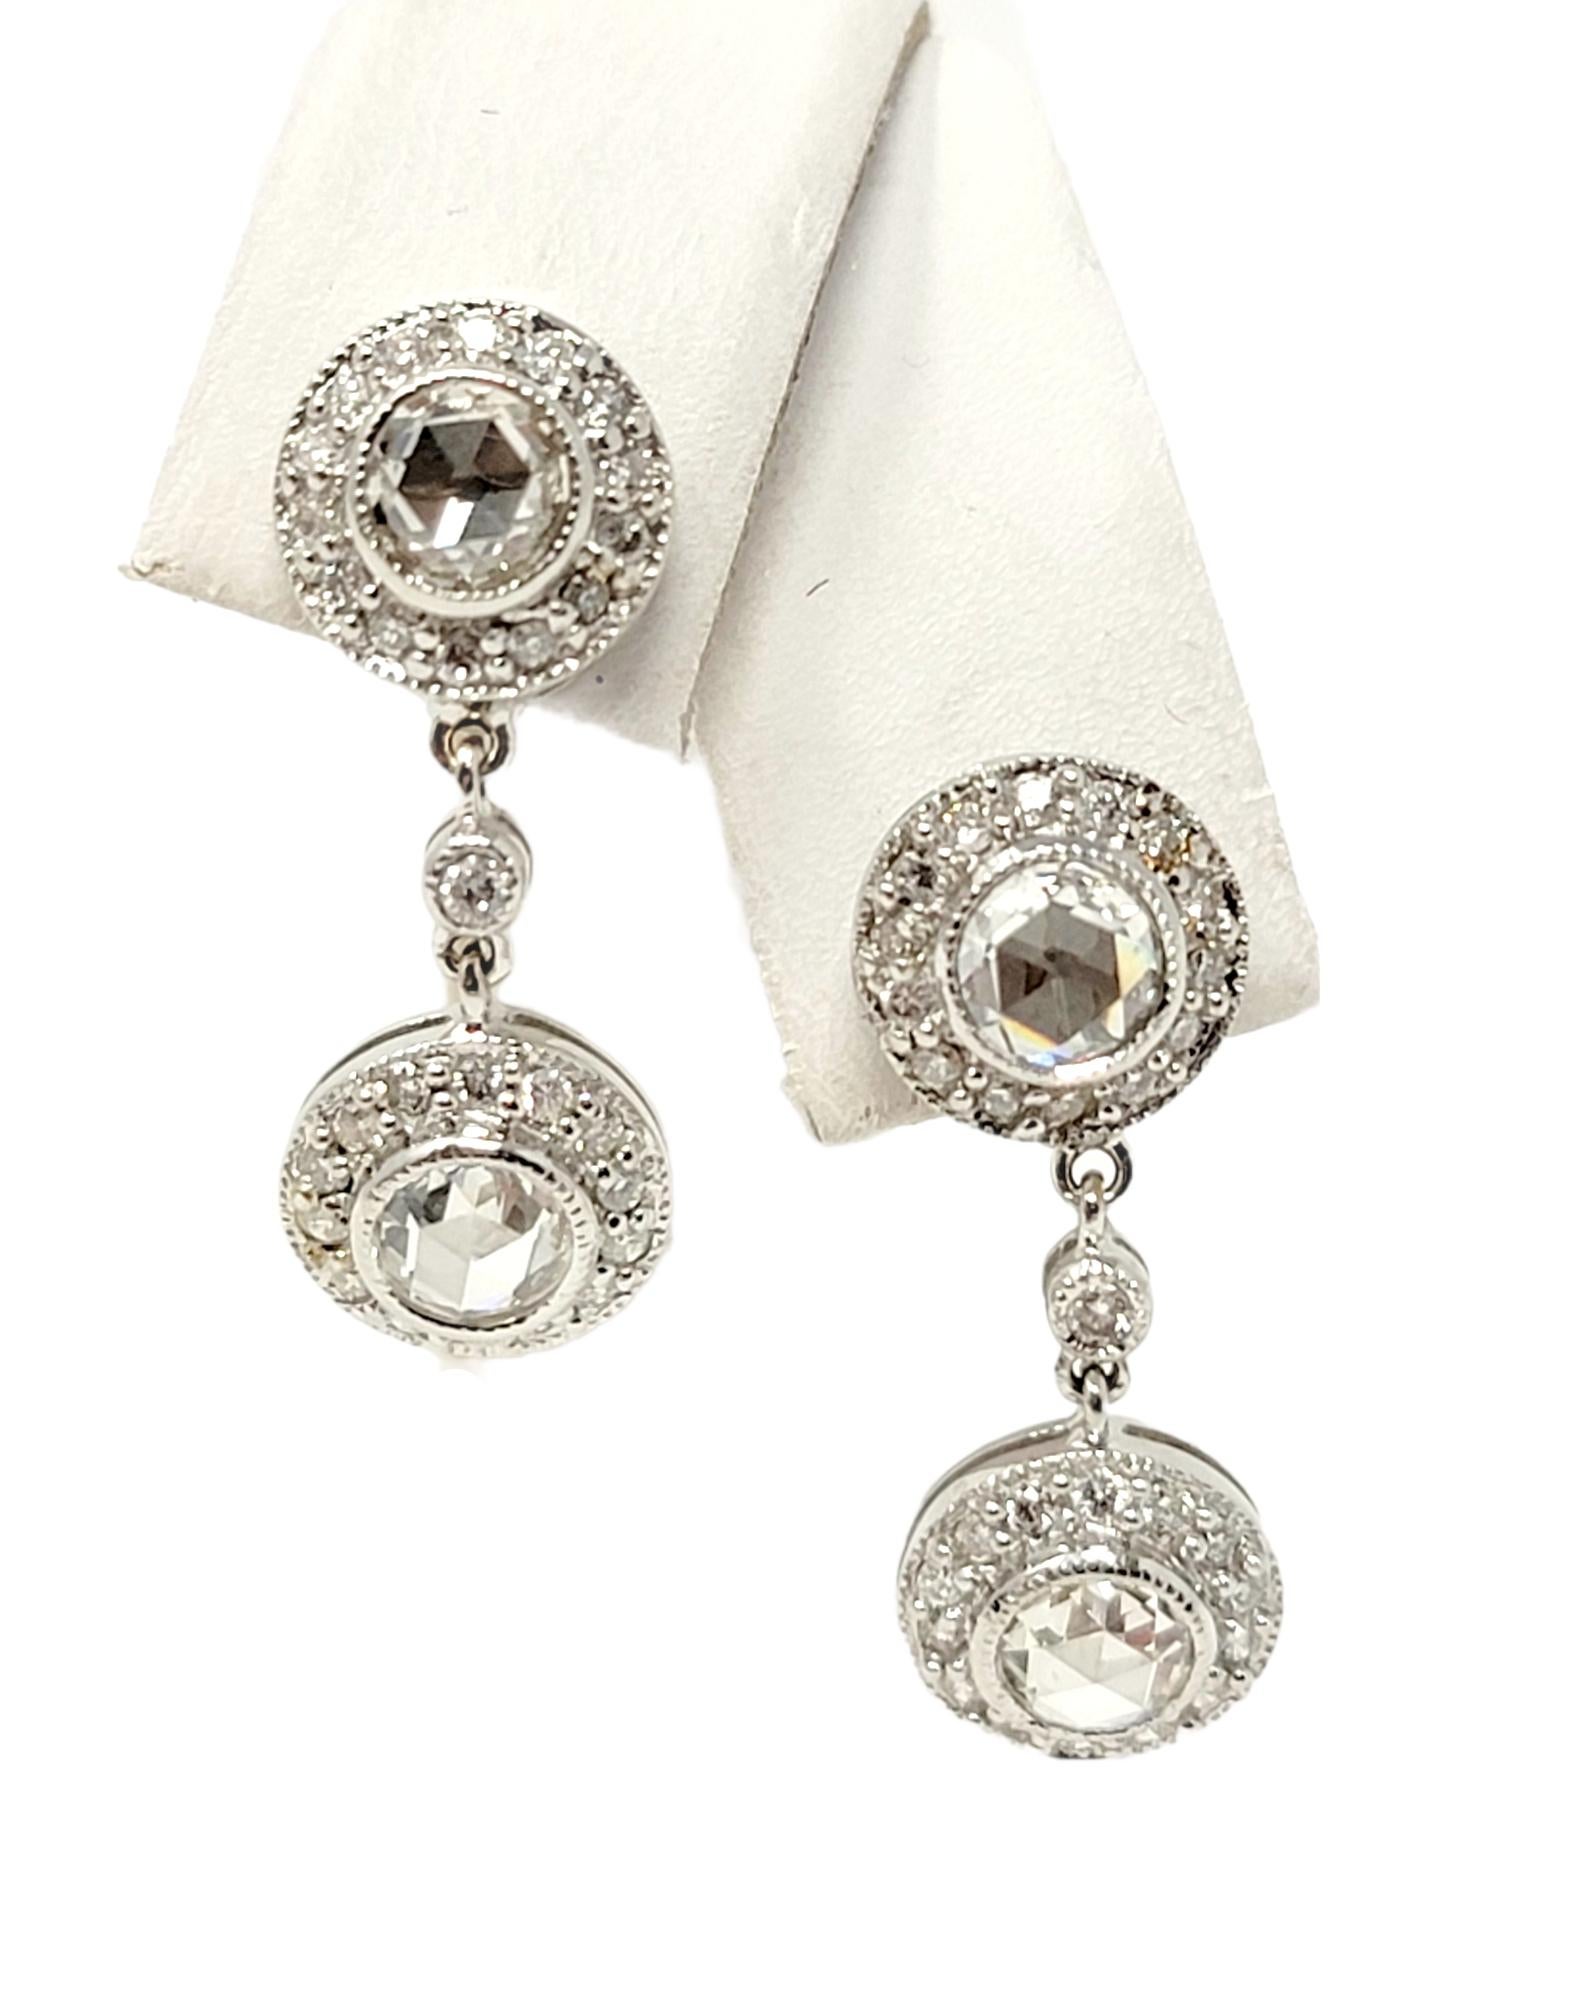 .96 Carats Total Round and Rose Cut Diamond Halo Dangle Earrings 14 Karat Gold In Good Condition For Sale In Scottsdale, AZ